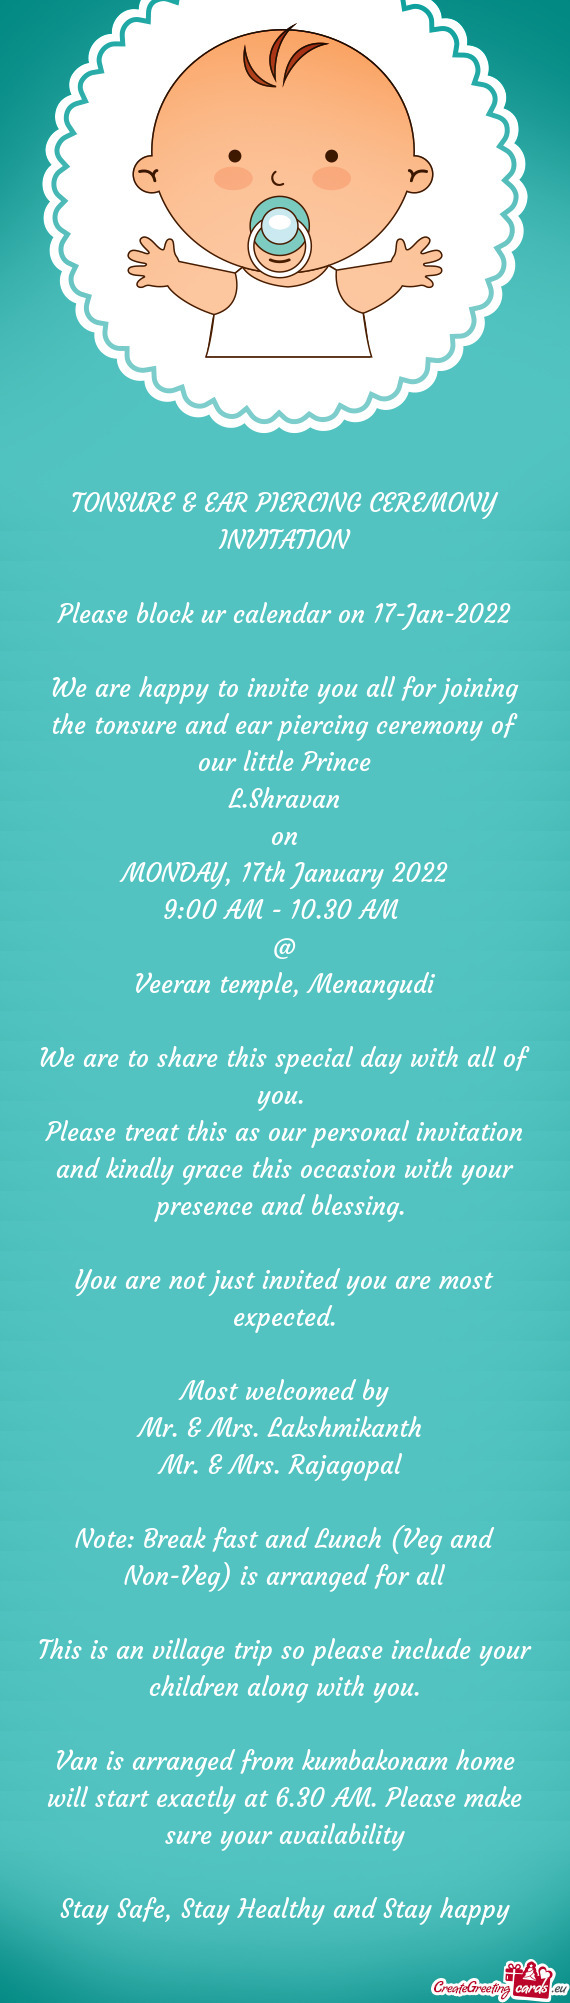 We are happy to invite you all for joining the tonsure and ear piercing ceremony of our little Princ